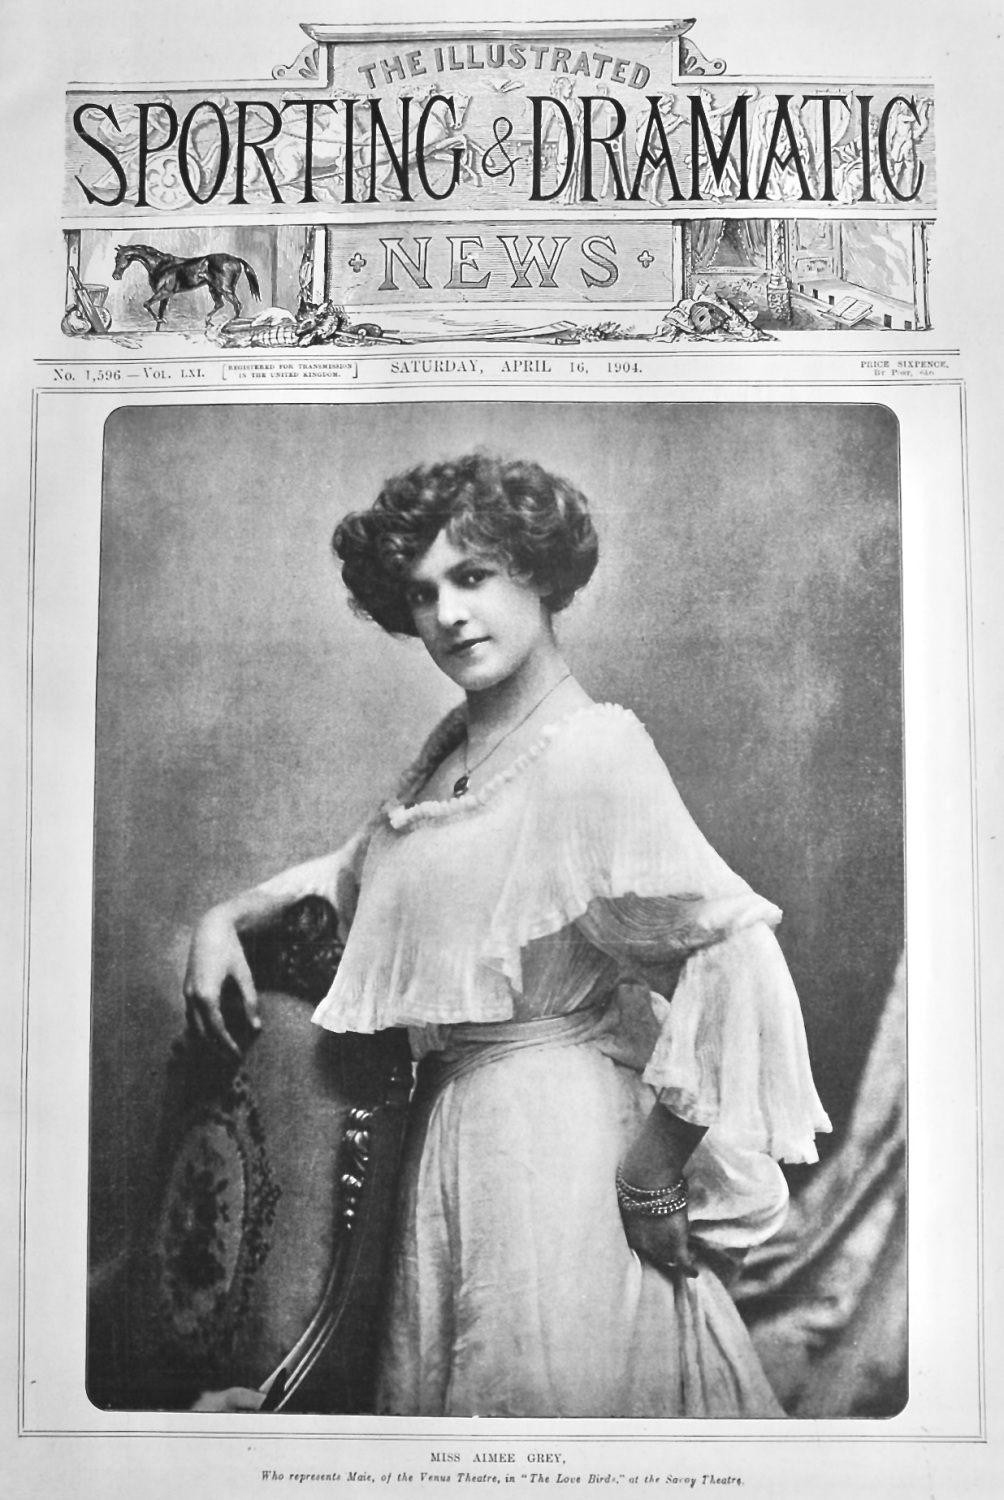 Miss Aimee Grey, who represents Maie, of the Venus Theatre, in 